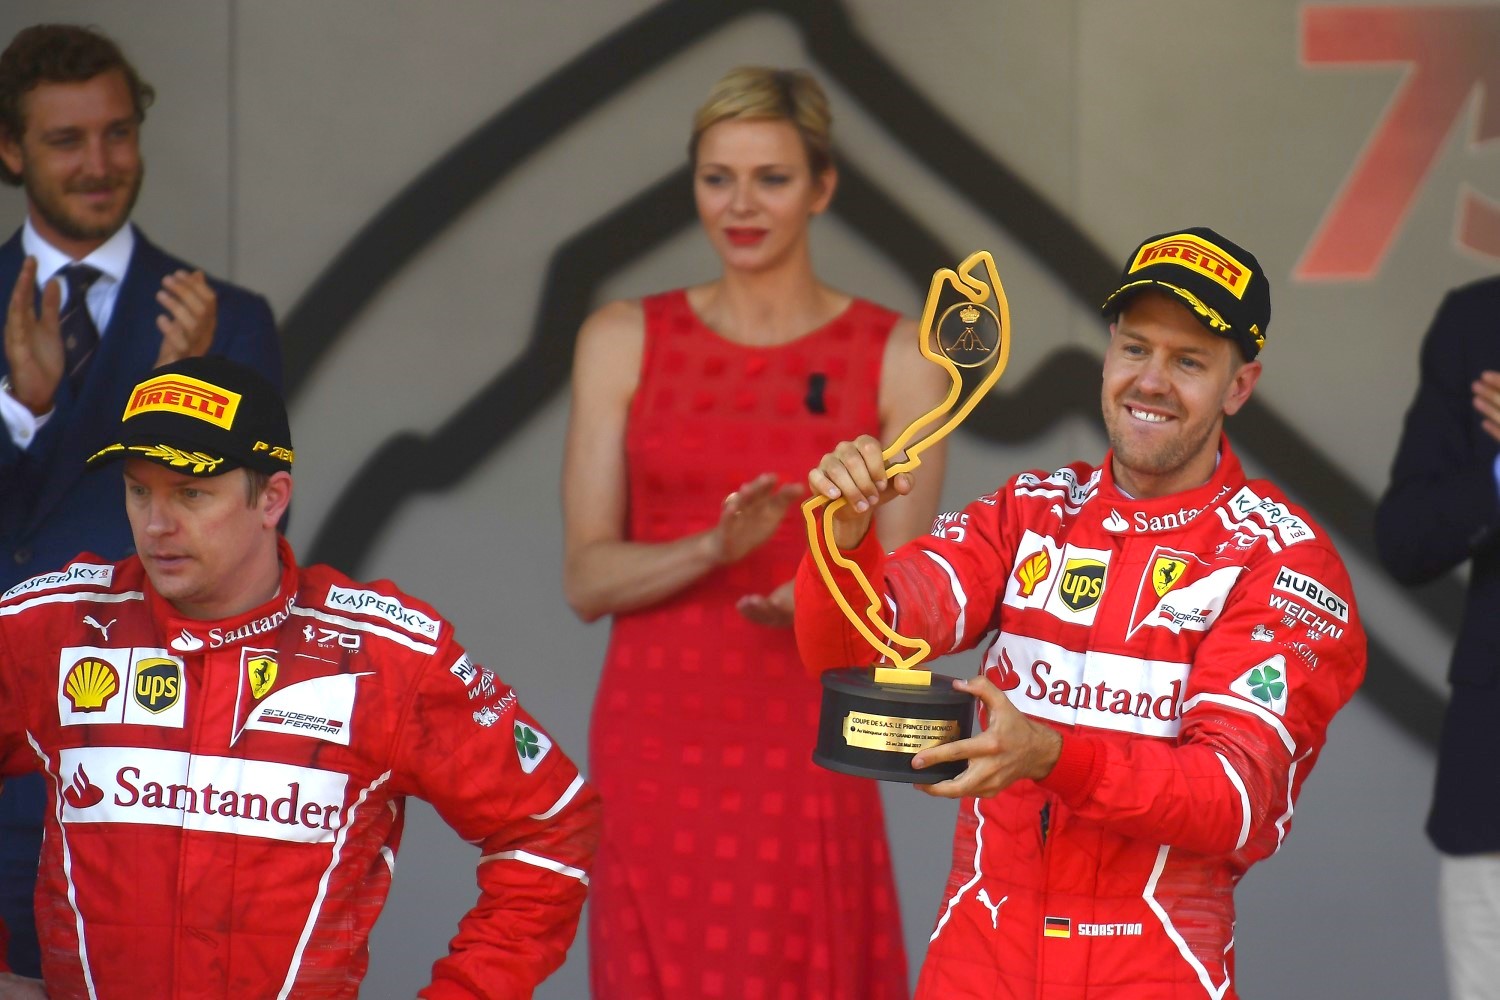 Why should Raikkonen be anry, he got buried by Vettel fair and square